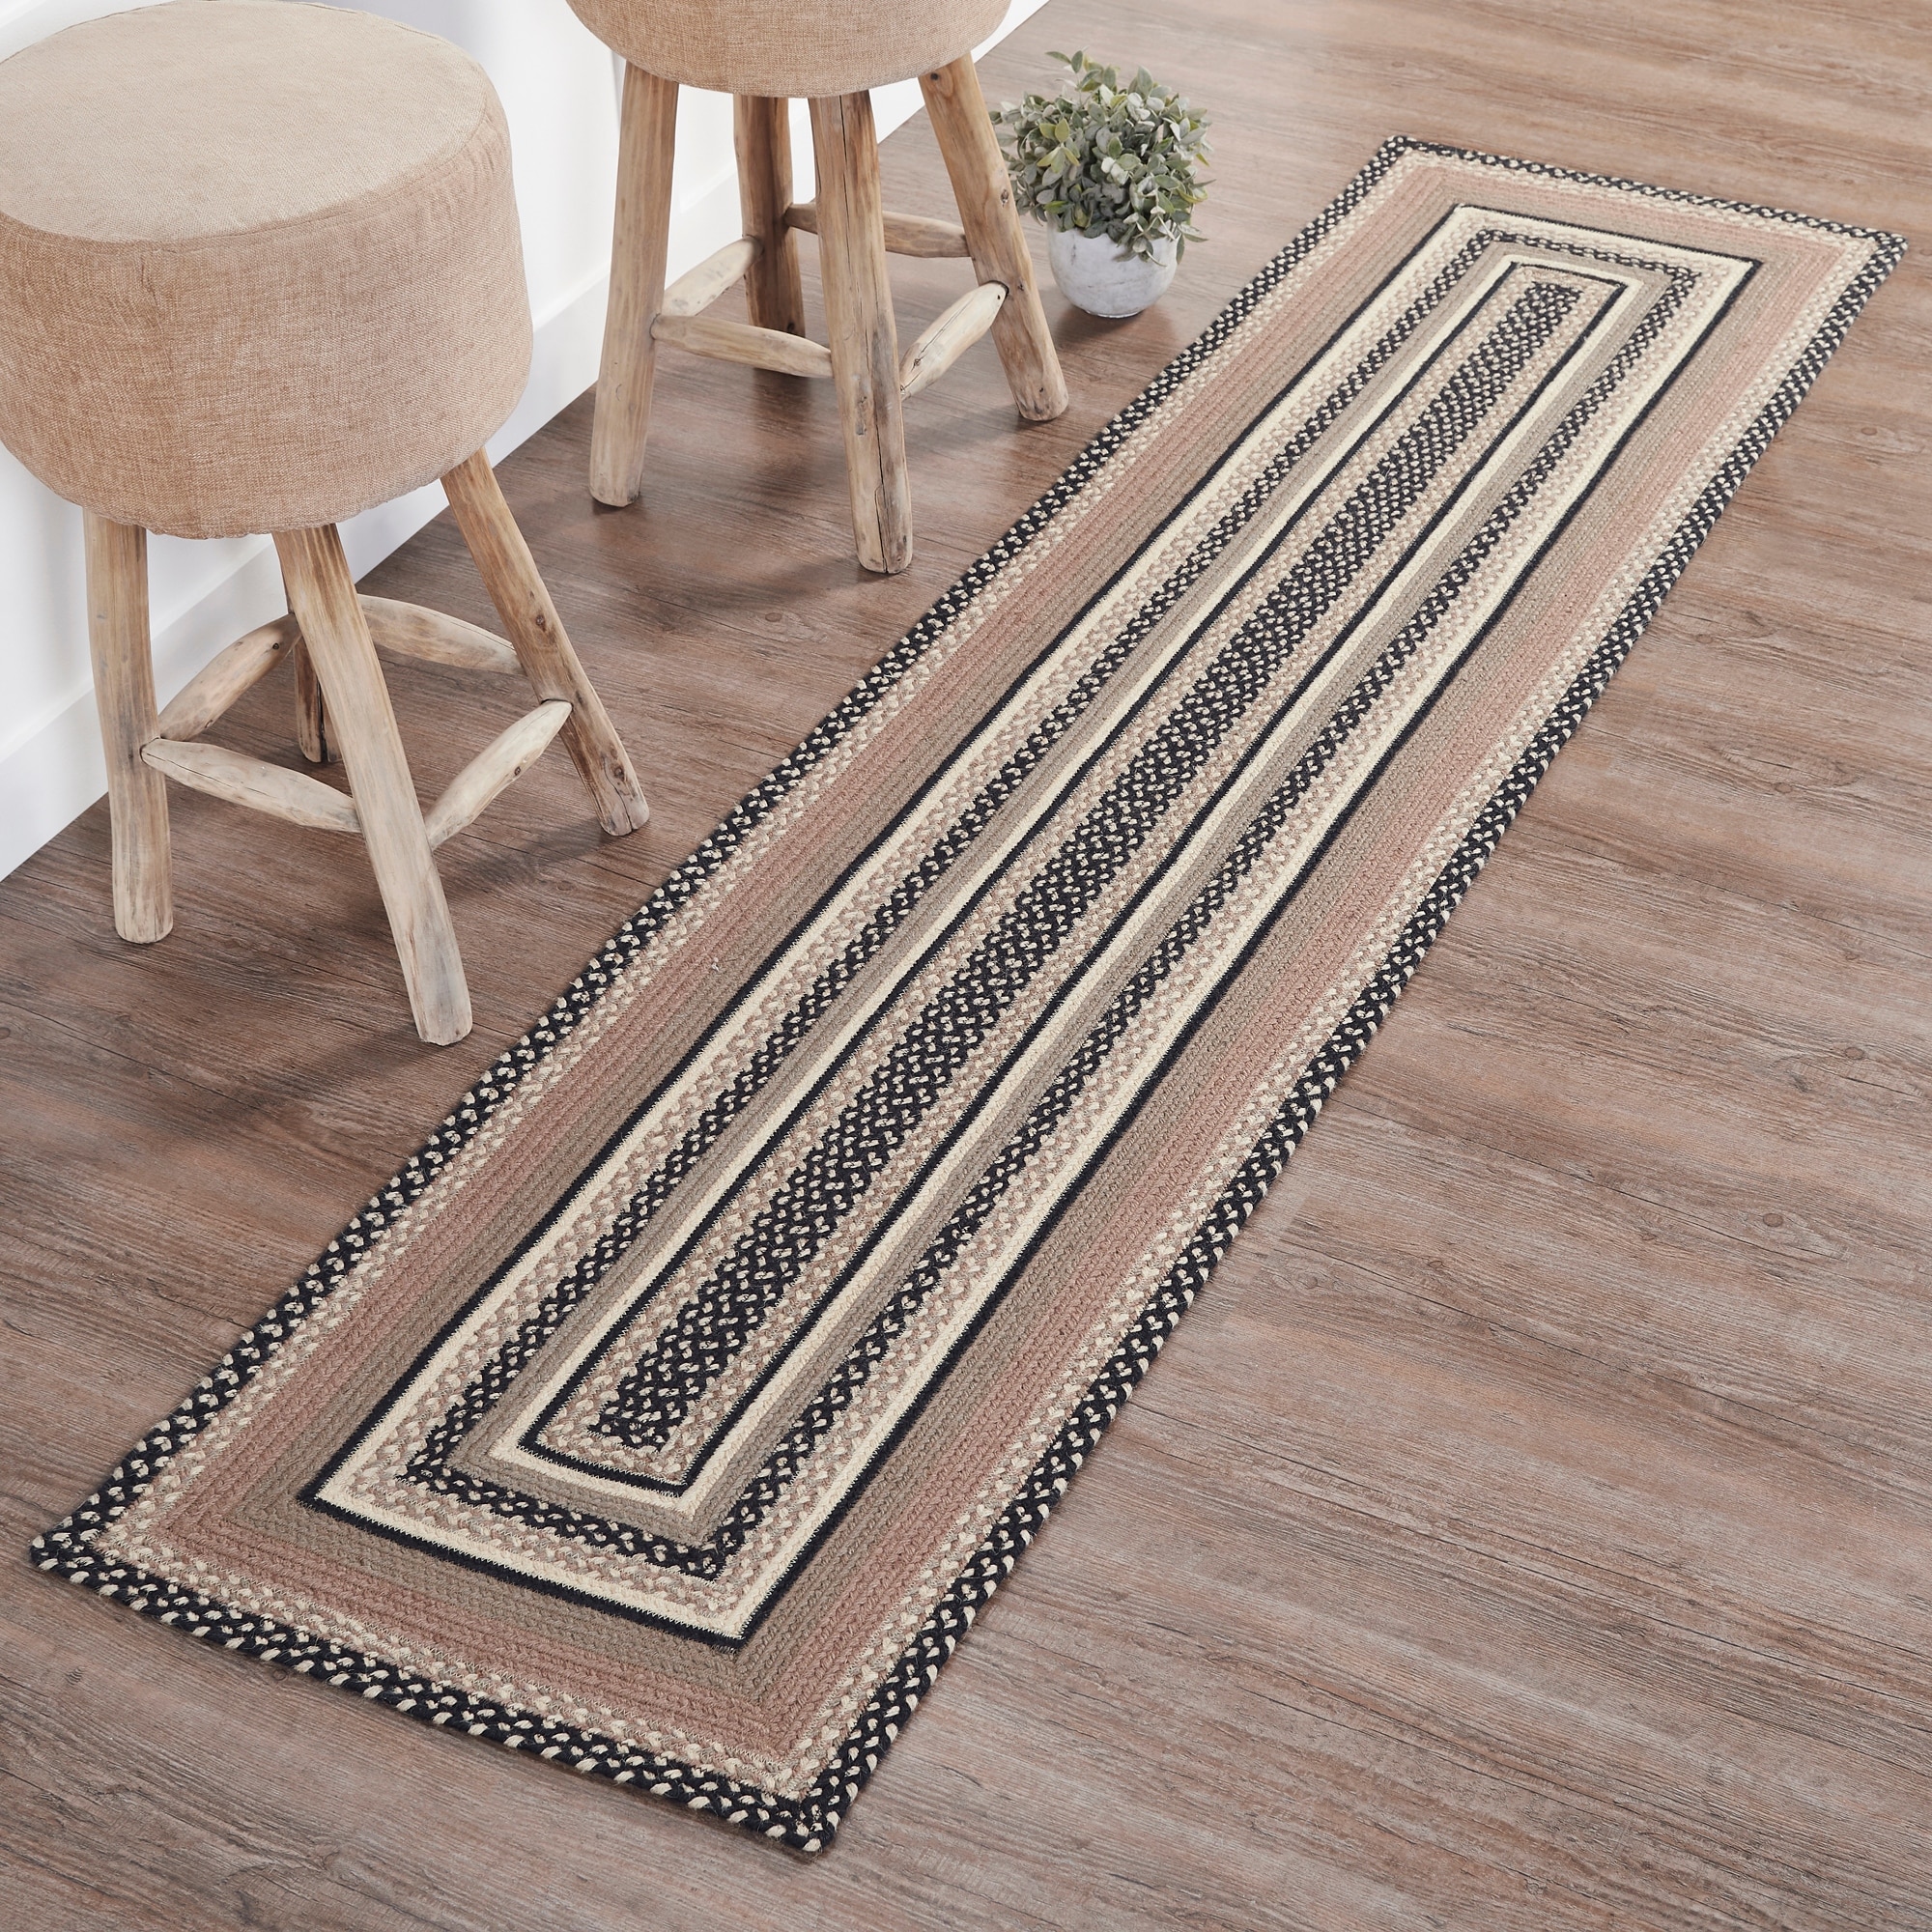 https://ak1.ostkcdn.com/images/products/is/images/direct/d1353e54e56888918f46dedbf013119be32d3527/Sawyer-Mill-Charcoal-Creme-Jute-Rug-Runner-Rect-w--Pad-24x96.jpg